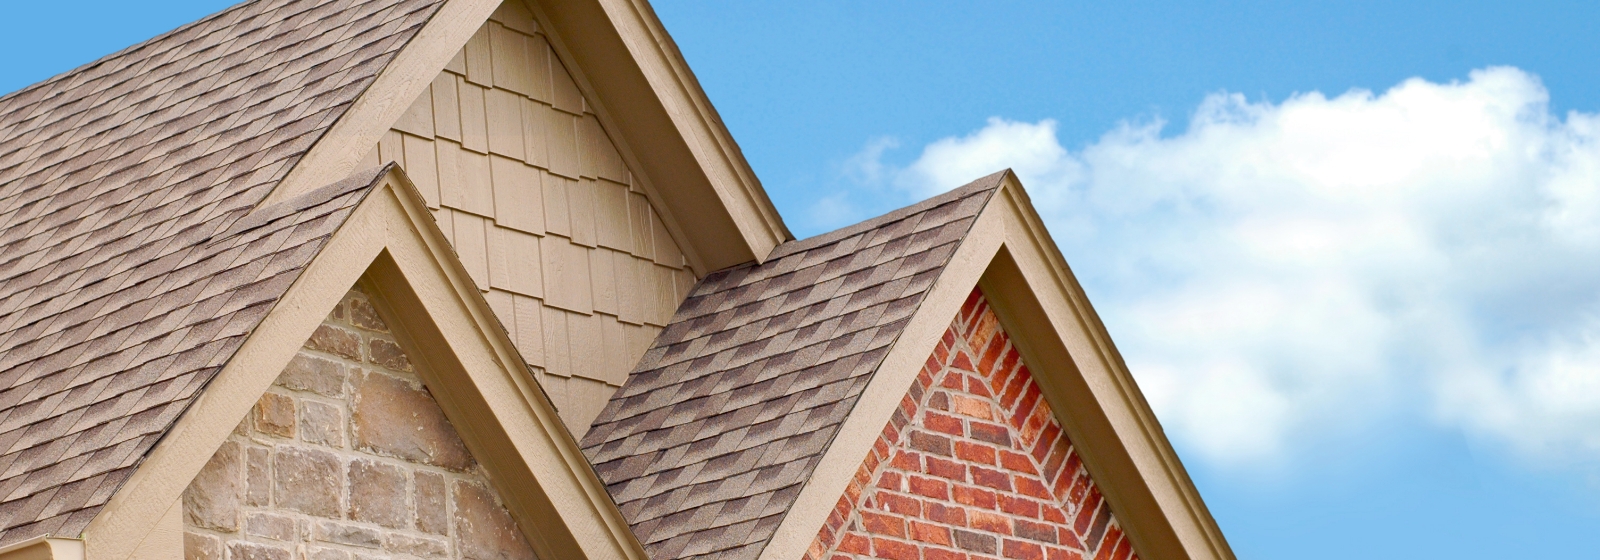 A photo of a three-pointed roof with brown shingles and red brick